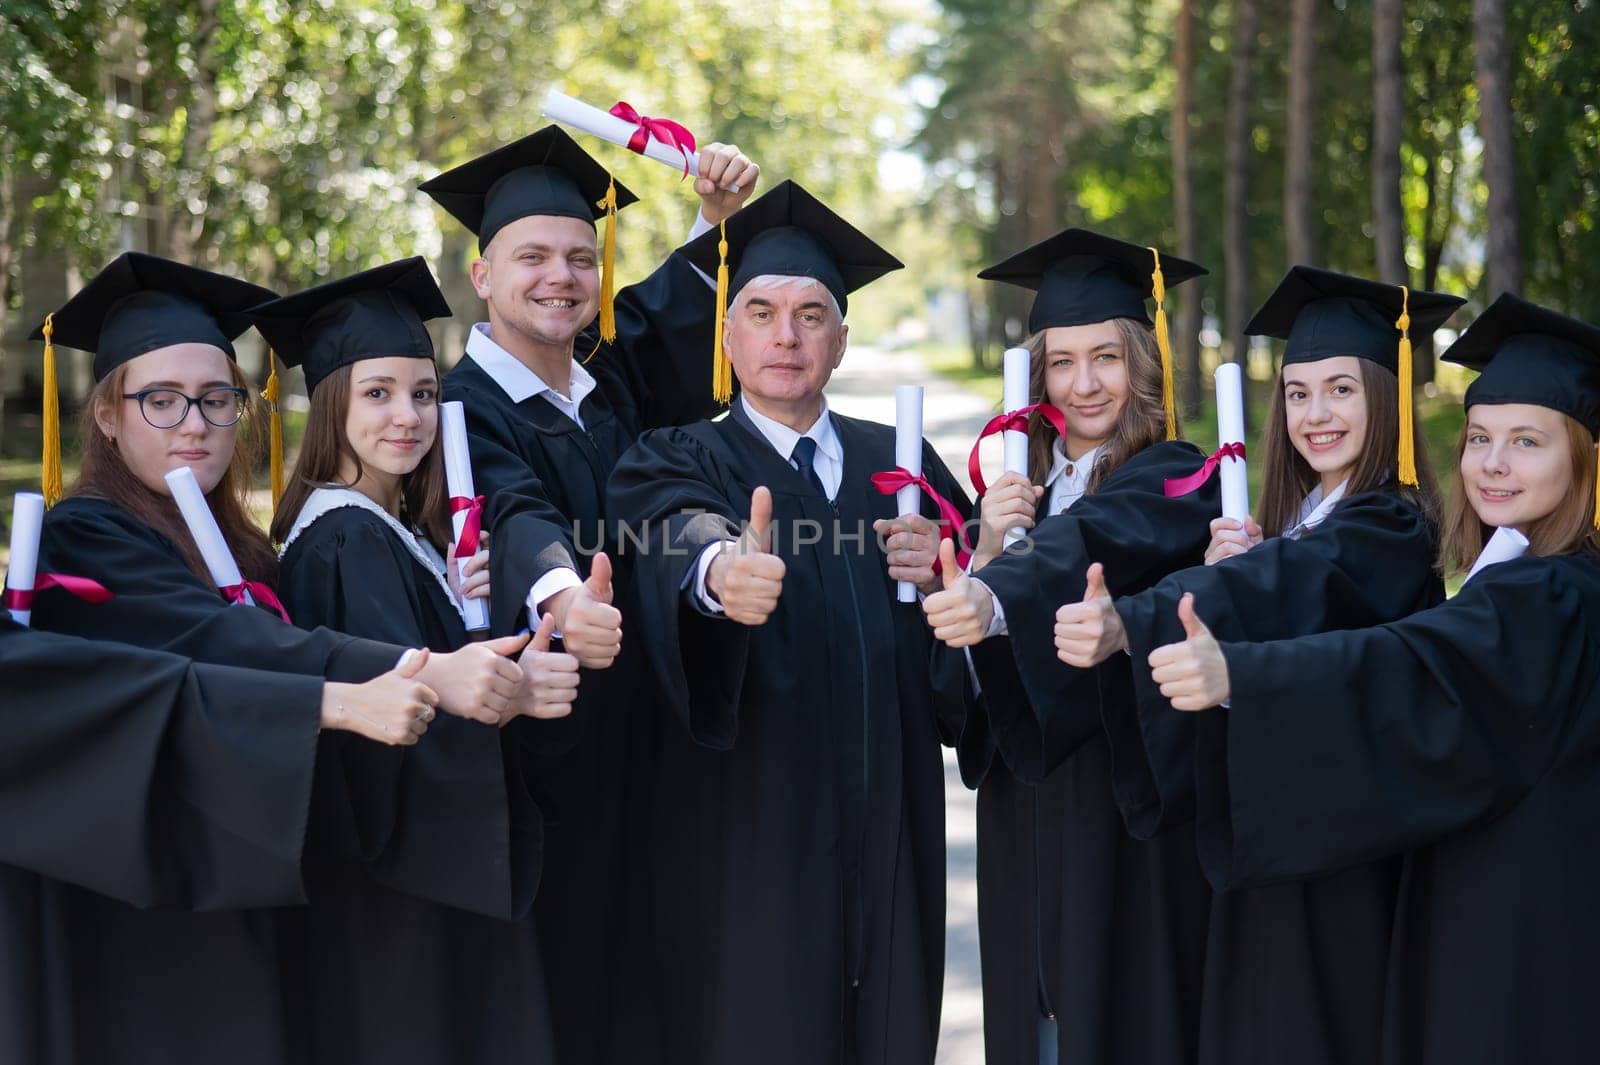 A group of graduates in robes give a thumbs up outdoors. Elderly student